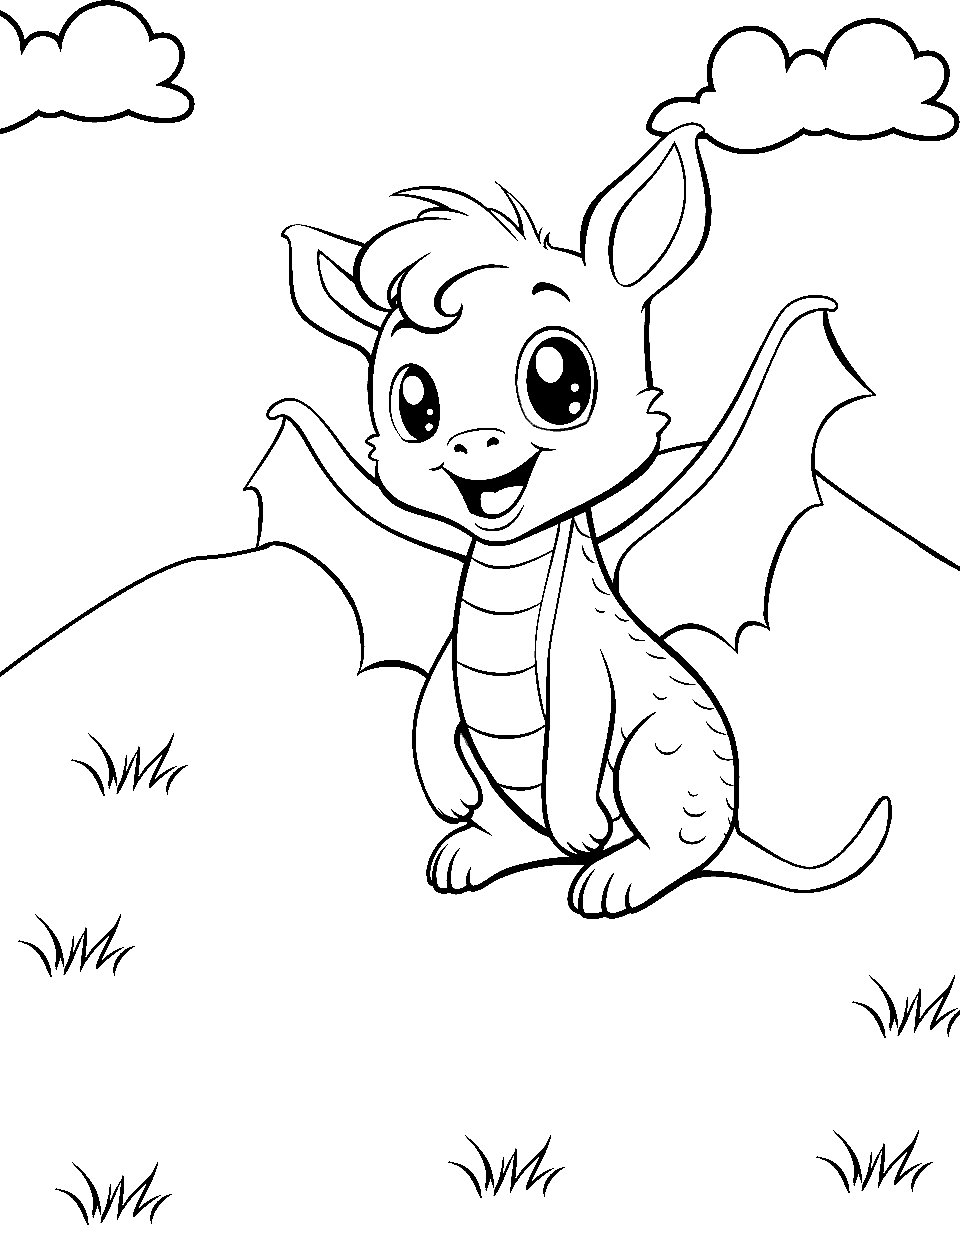 Dragon Delight Coloring Page - A baby dragon sitting in a meadow.